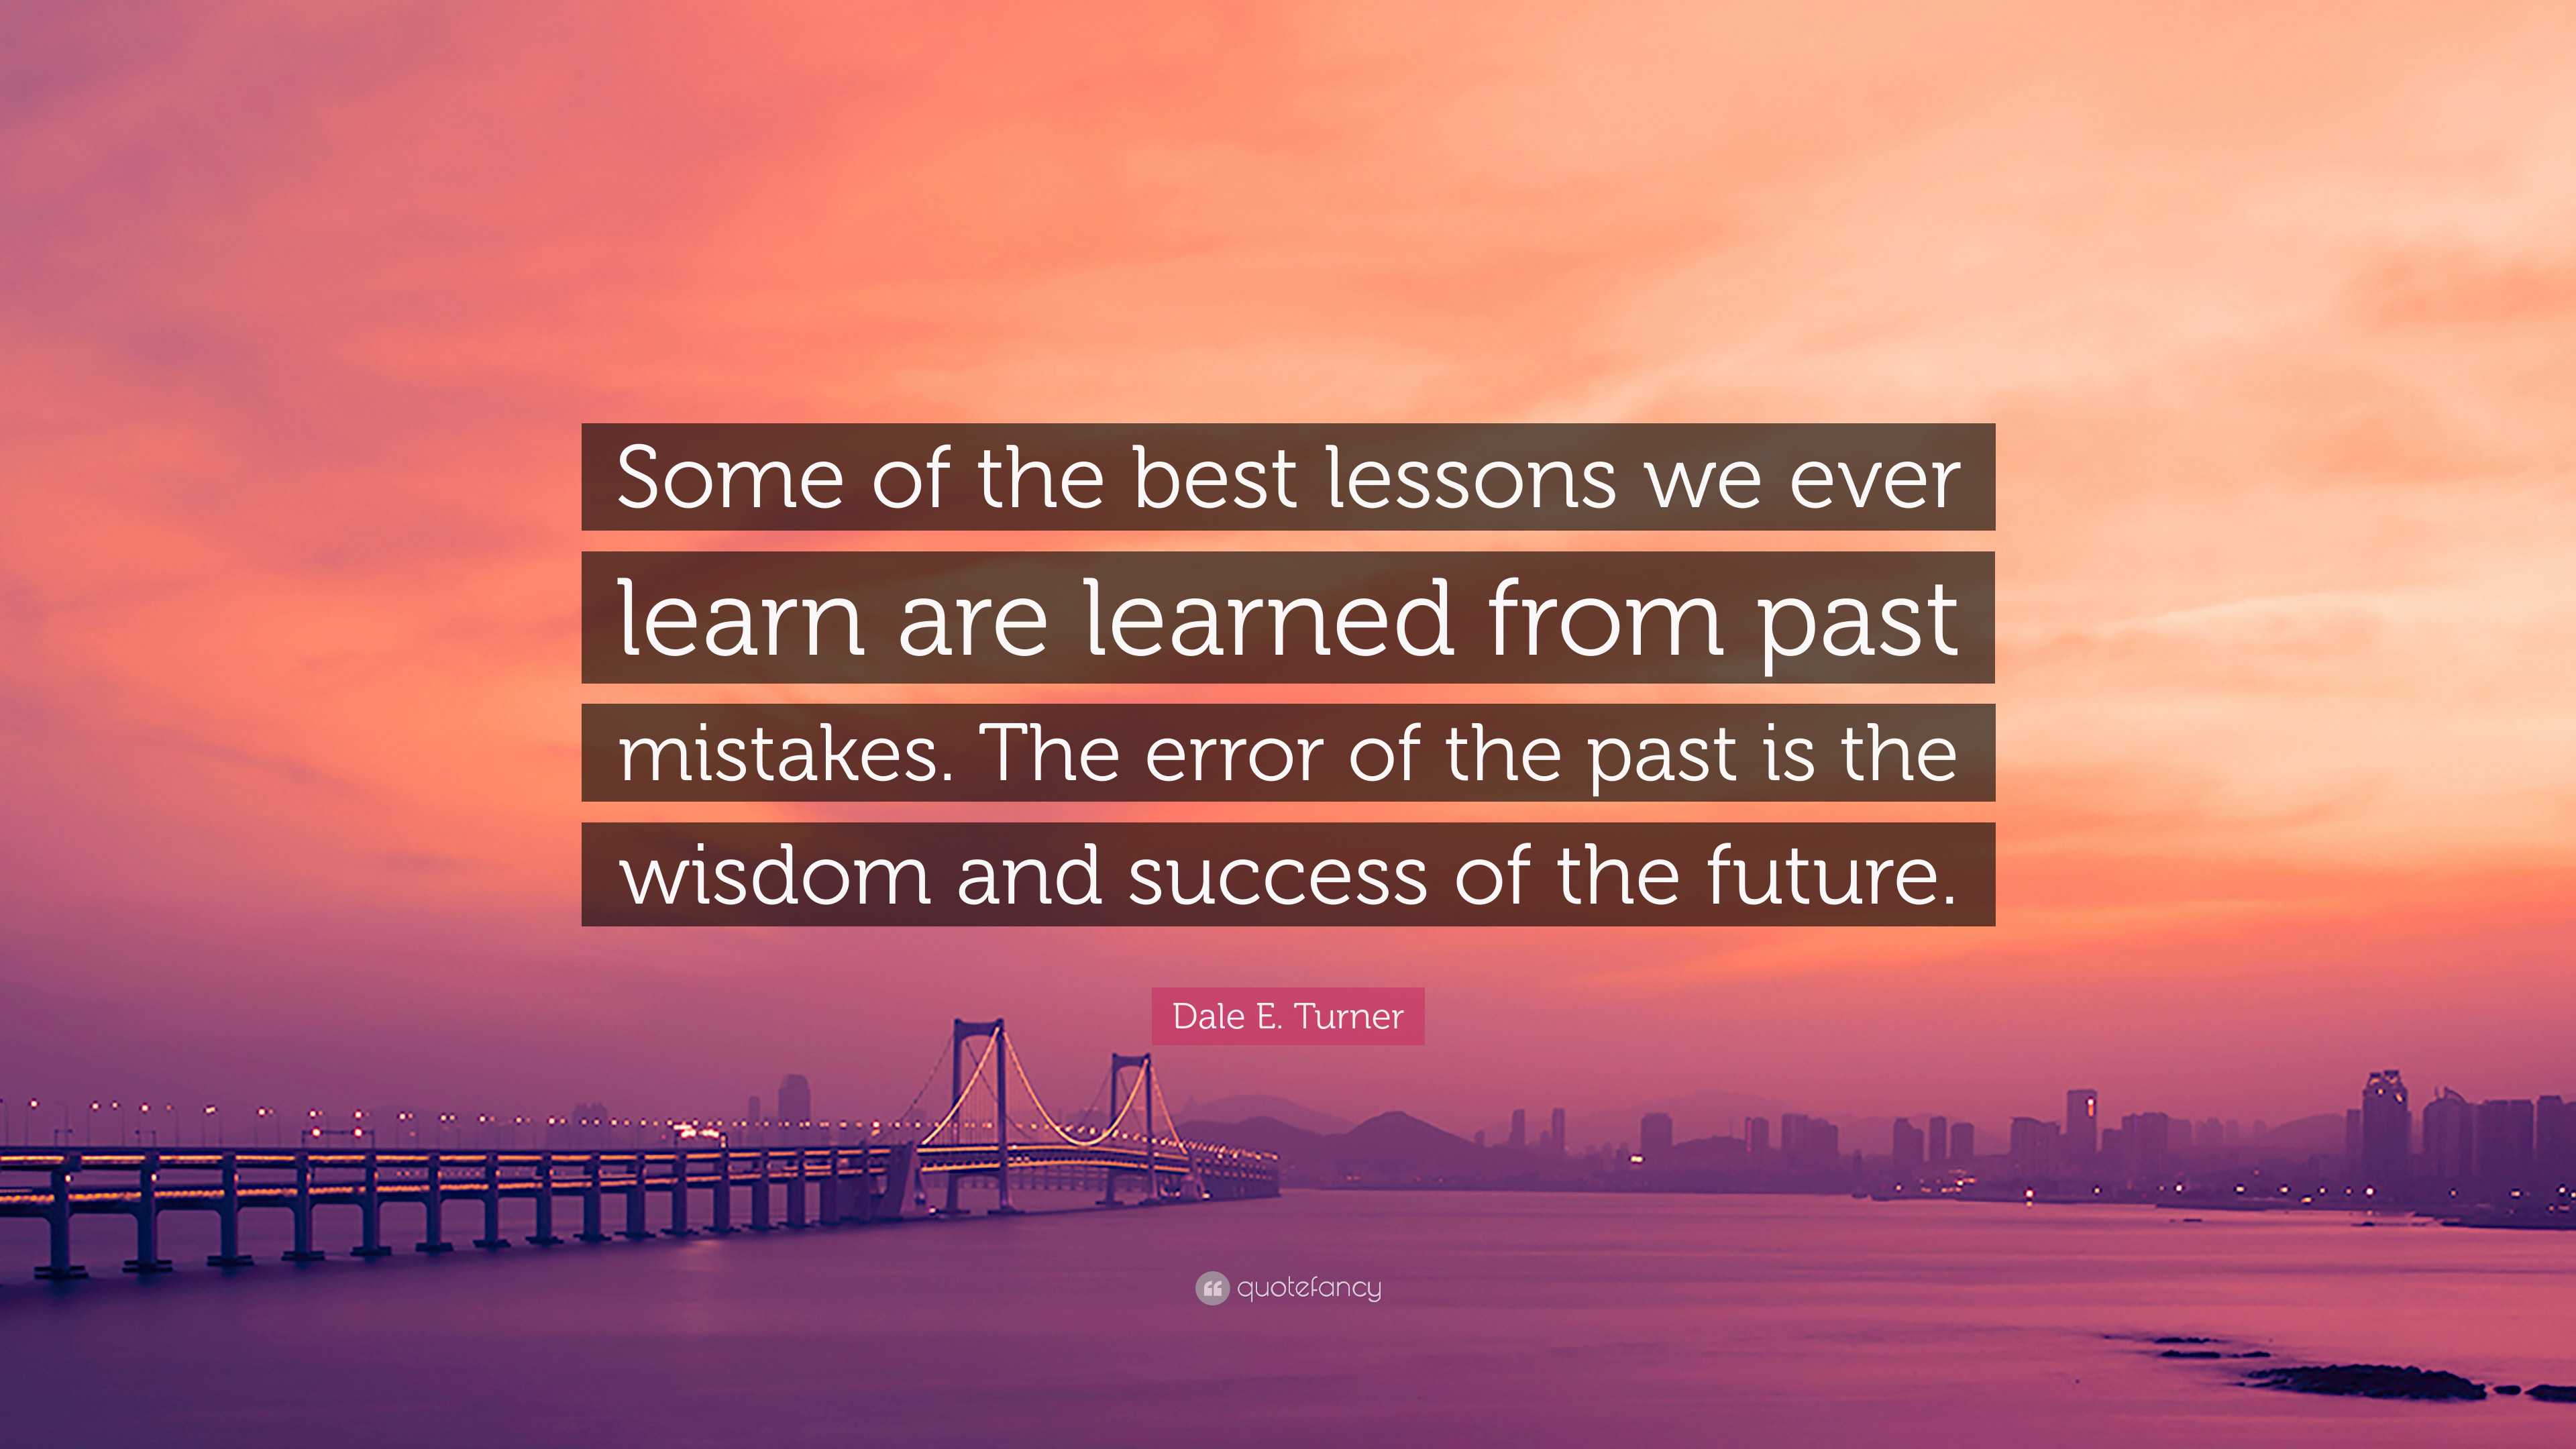 The Past Is WHere You Learbed The Lessons The Future Is Where You